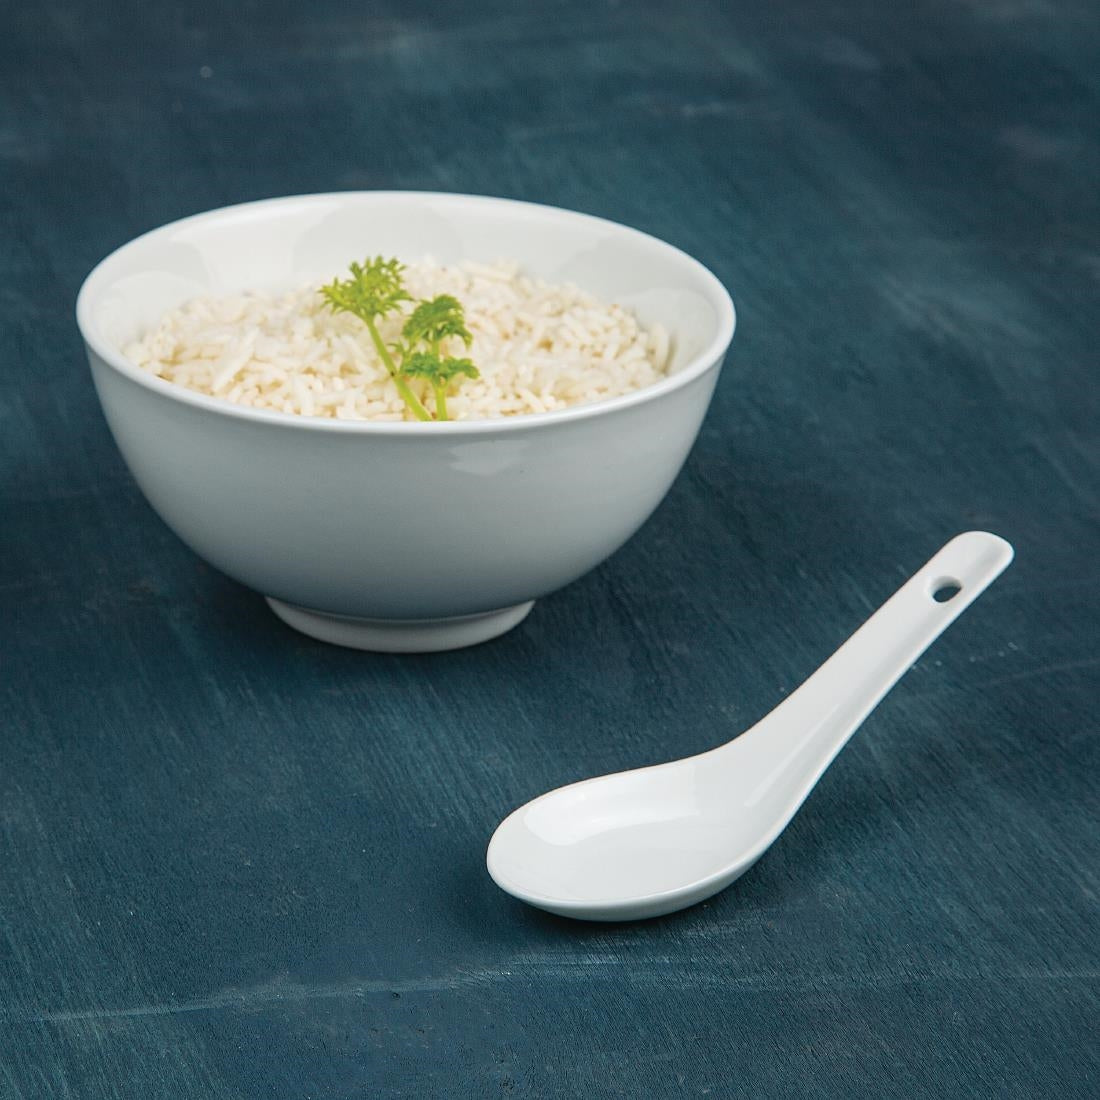 Olympia Whiteware Rice Spoons 130mm (Pack of 24)